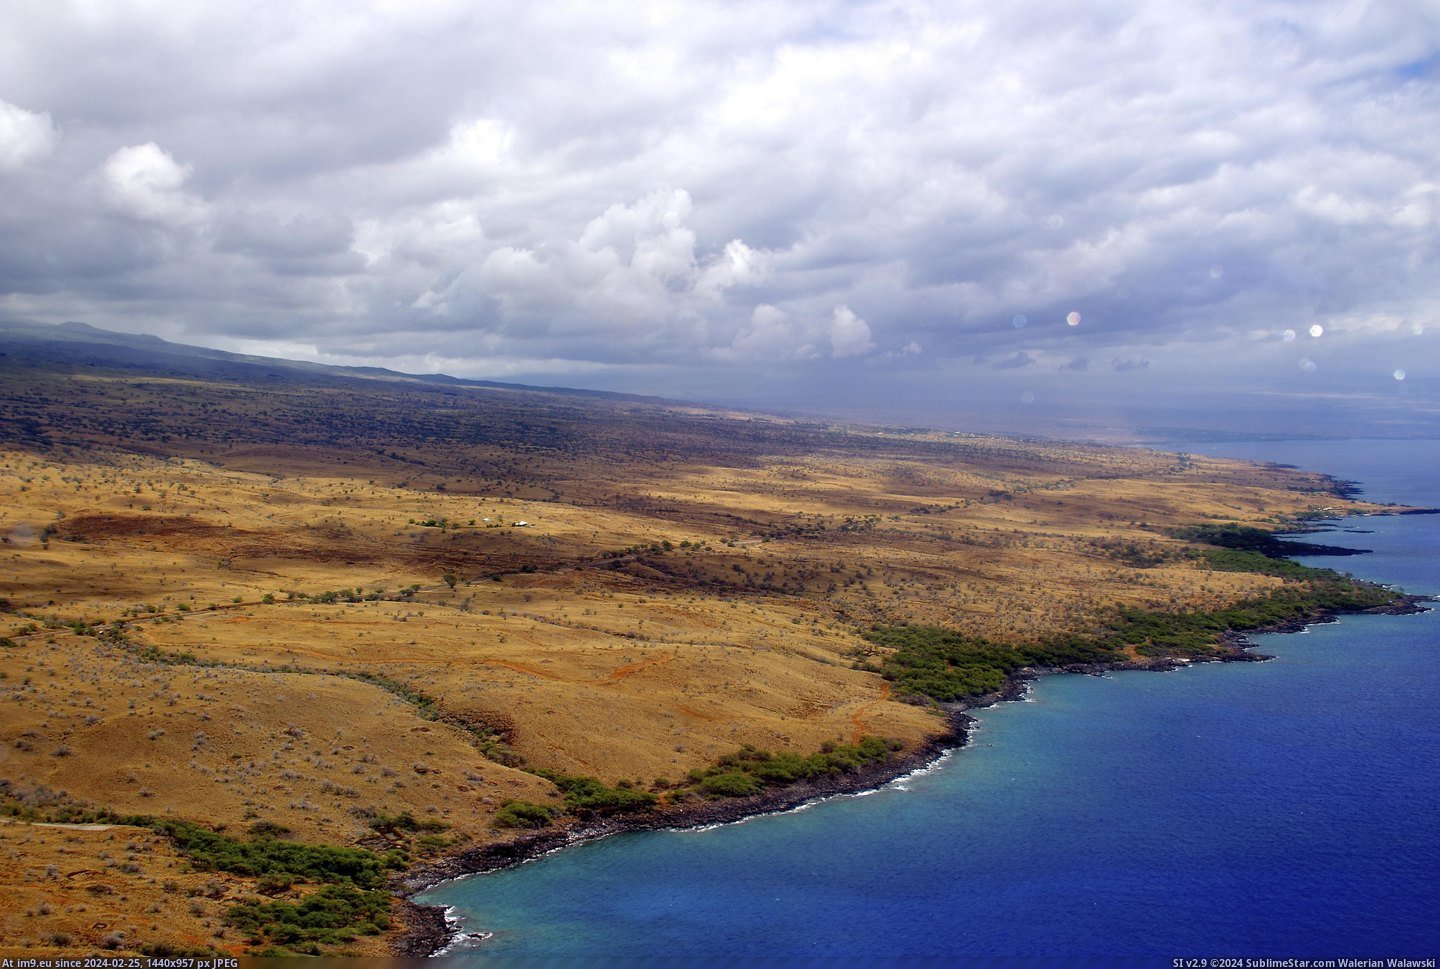 #One #Big #World #Hawaii #Climates #Island #Vol #Desert [Earthporn] Hawaii's Big Island has one of the most diverse climates in the world. 1-3 dense rainforest, 1-3 desert, and 1-3 vol Pic. (Obraz z album My r/EARTHPORN favs))